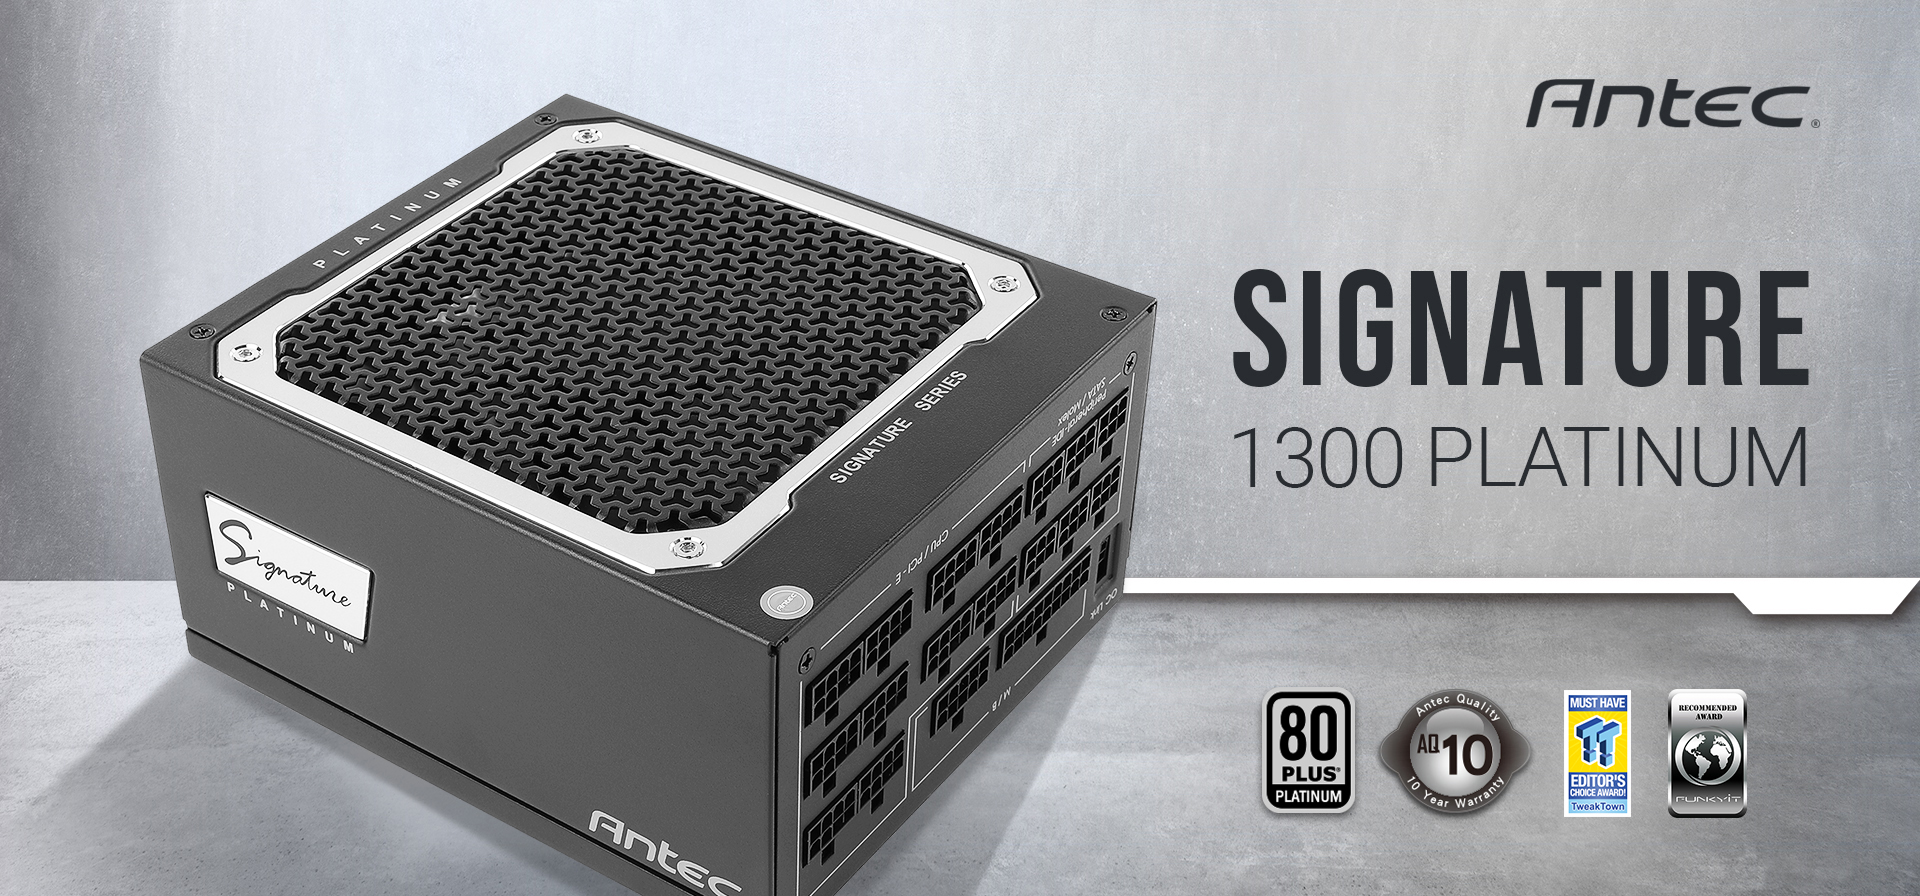 Antec Signature Series SP1300, 80 PLUS Platinum Certified, 1300W Full  Modular with OC Link Feature, PhaseWave Design, Full Top-Grade Japanese  Caps, Zero RPM Mode, 135 mm FDB Silence & 10-Year Warranty -